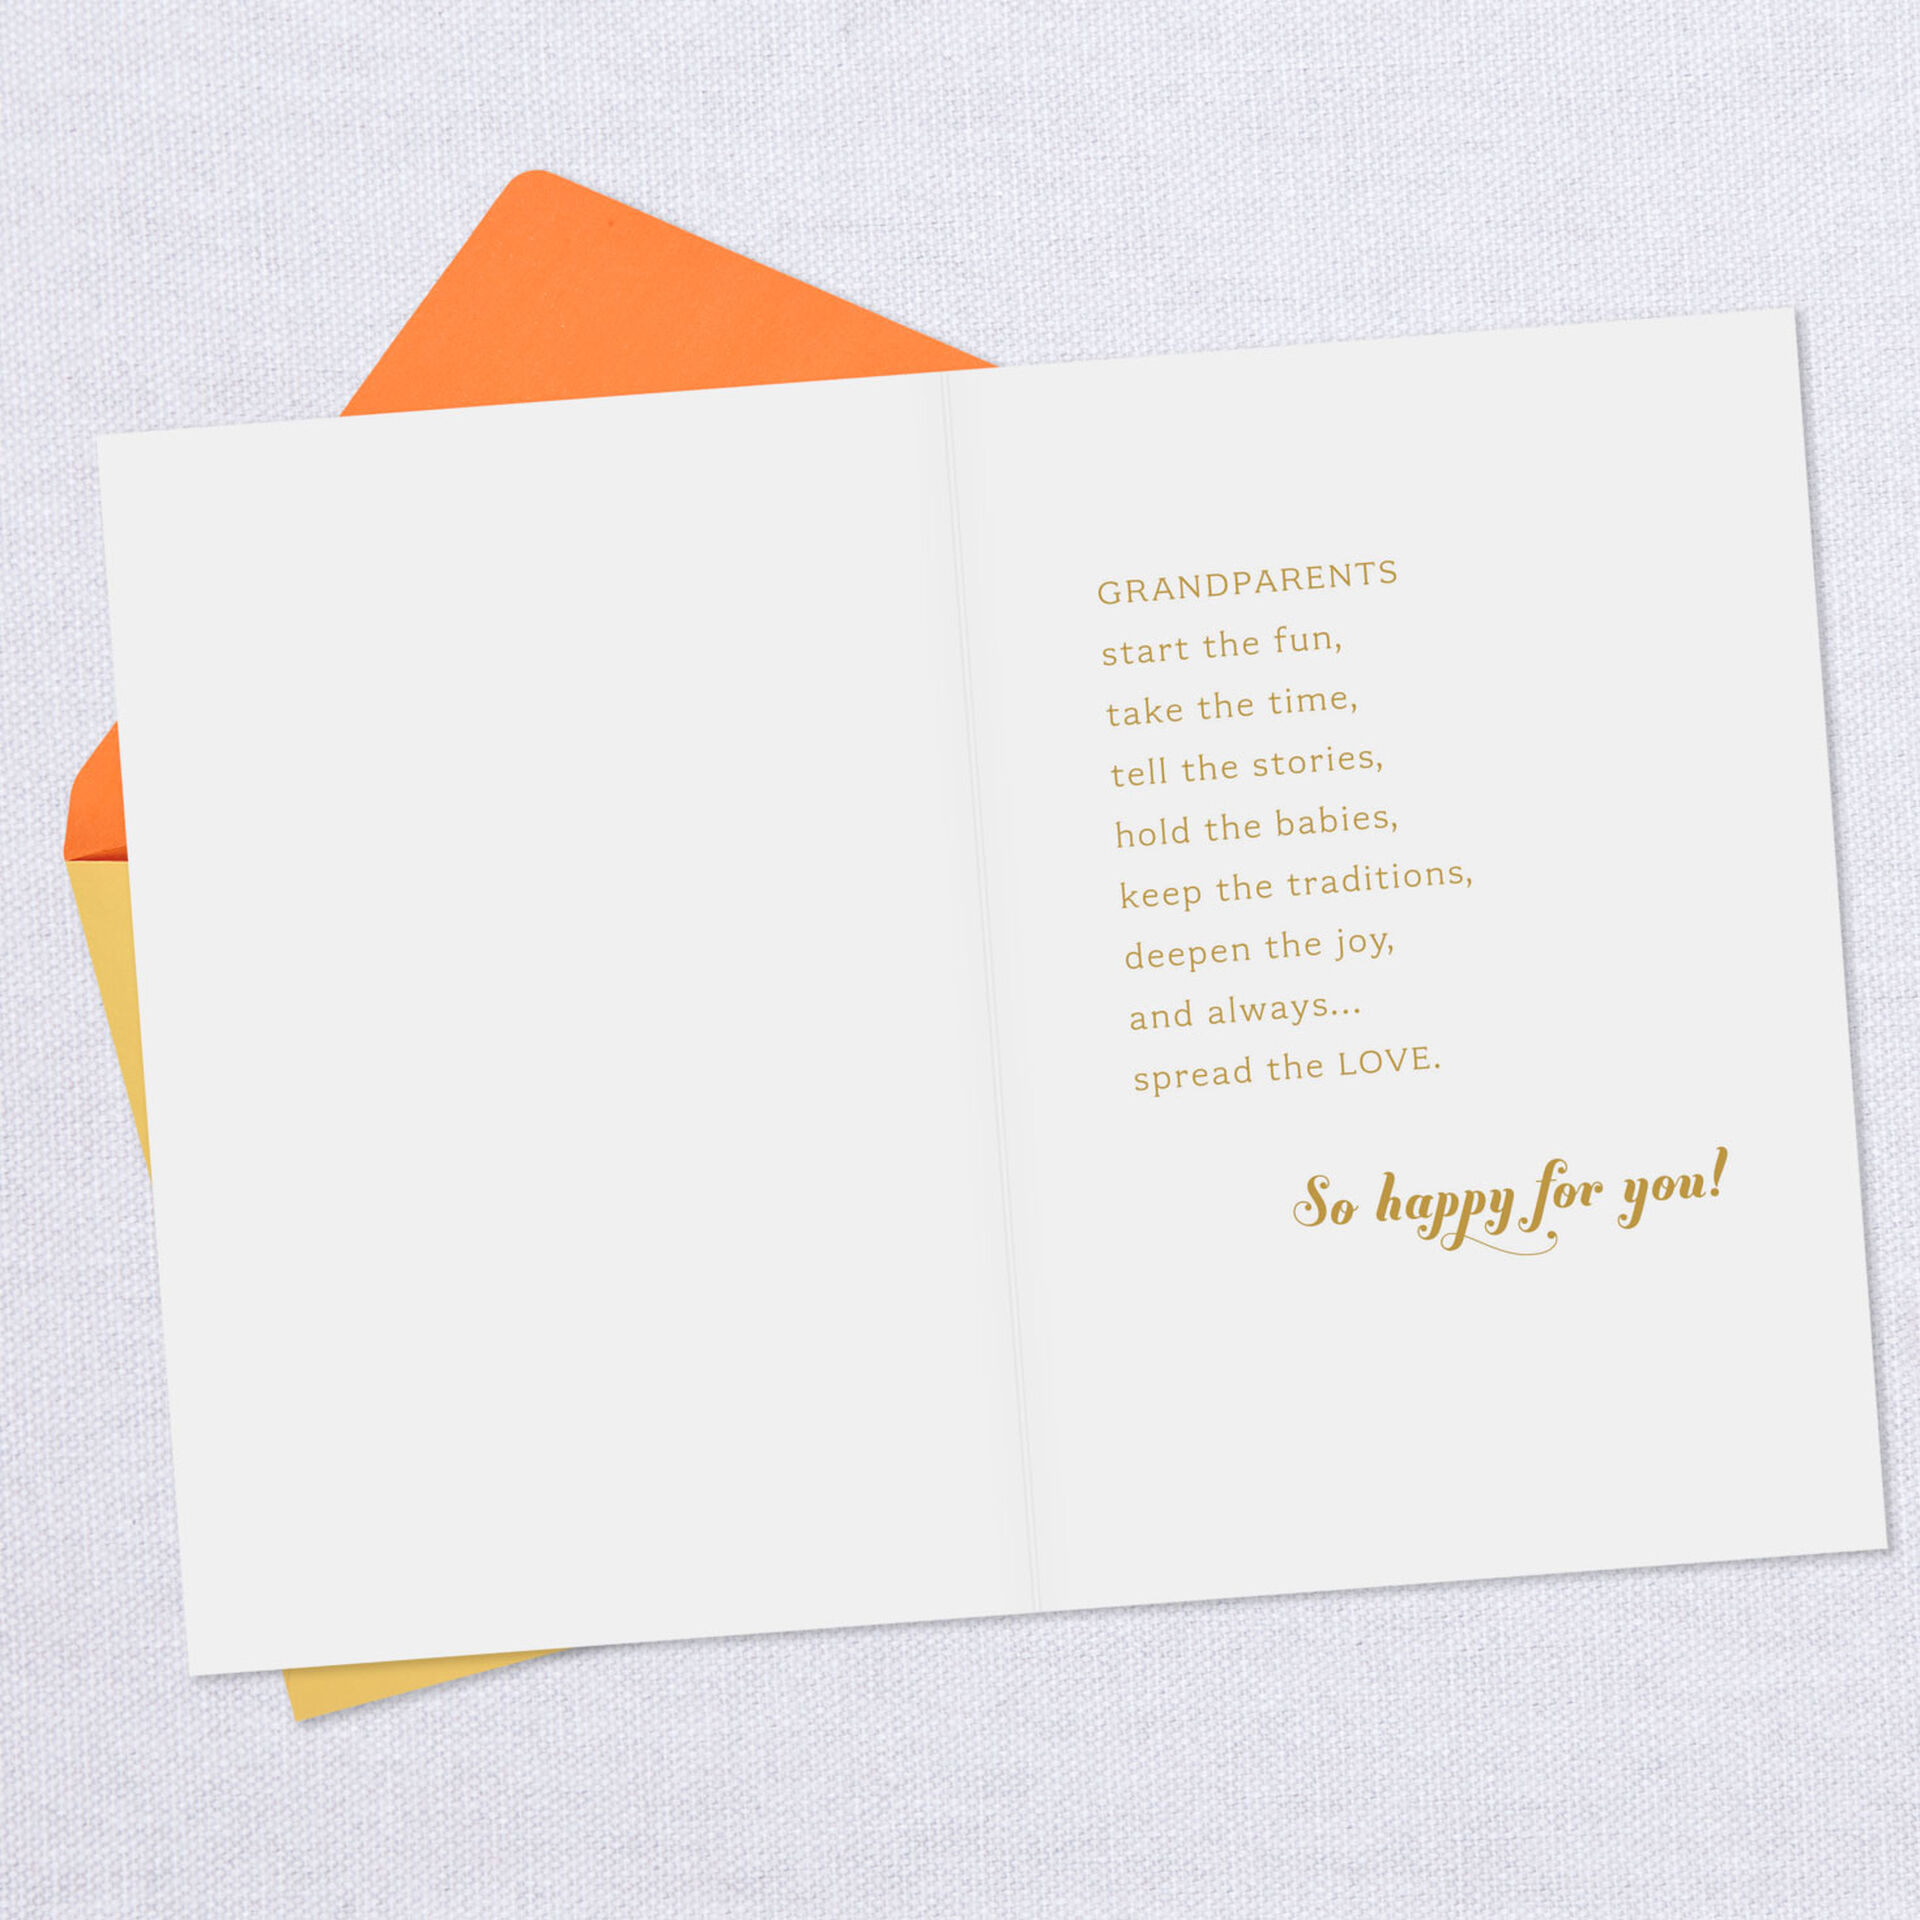 Baby-Carriage-Baby-Card-for-Grandparents_299G2429_03